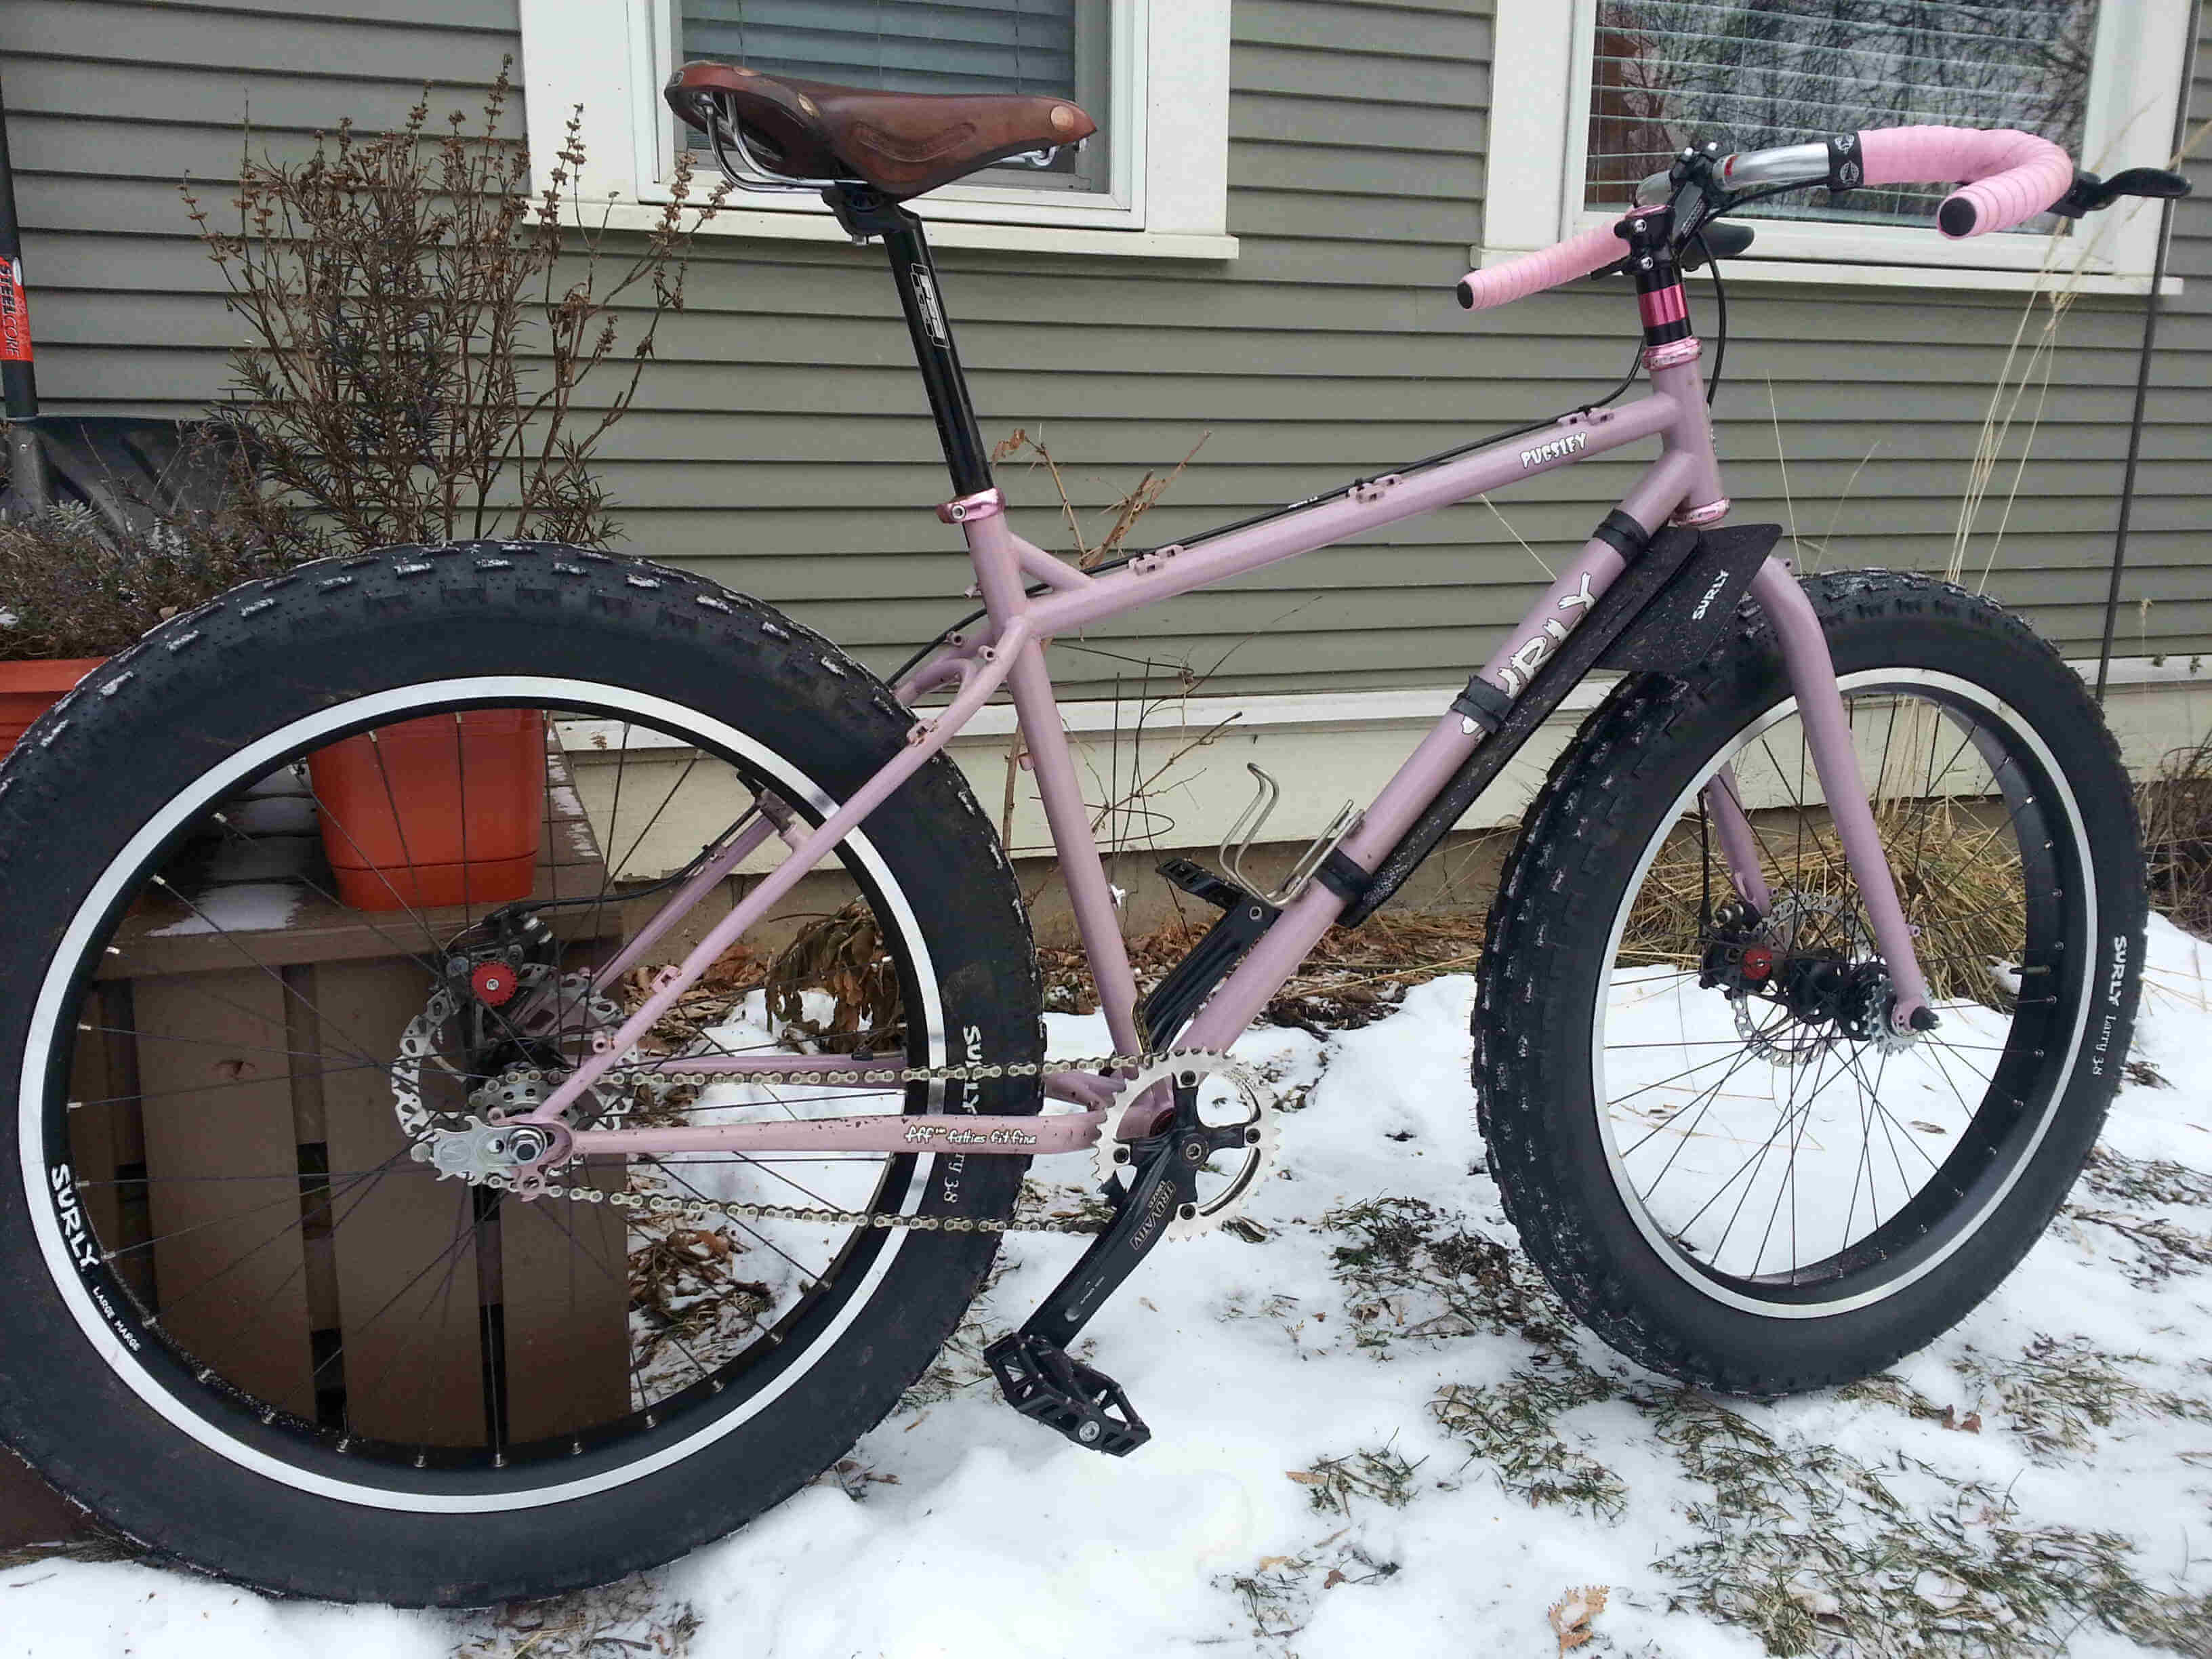 Right side view of a pink Surly Pugsley fat bike, parked on snow, near the side of a gray house